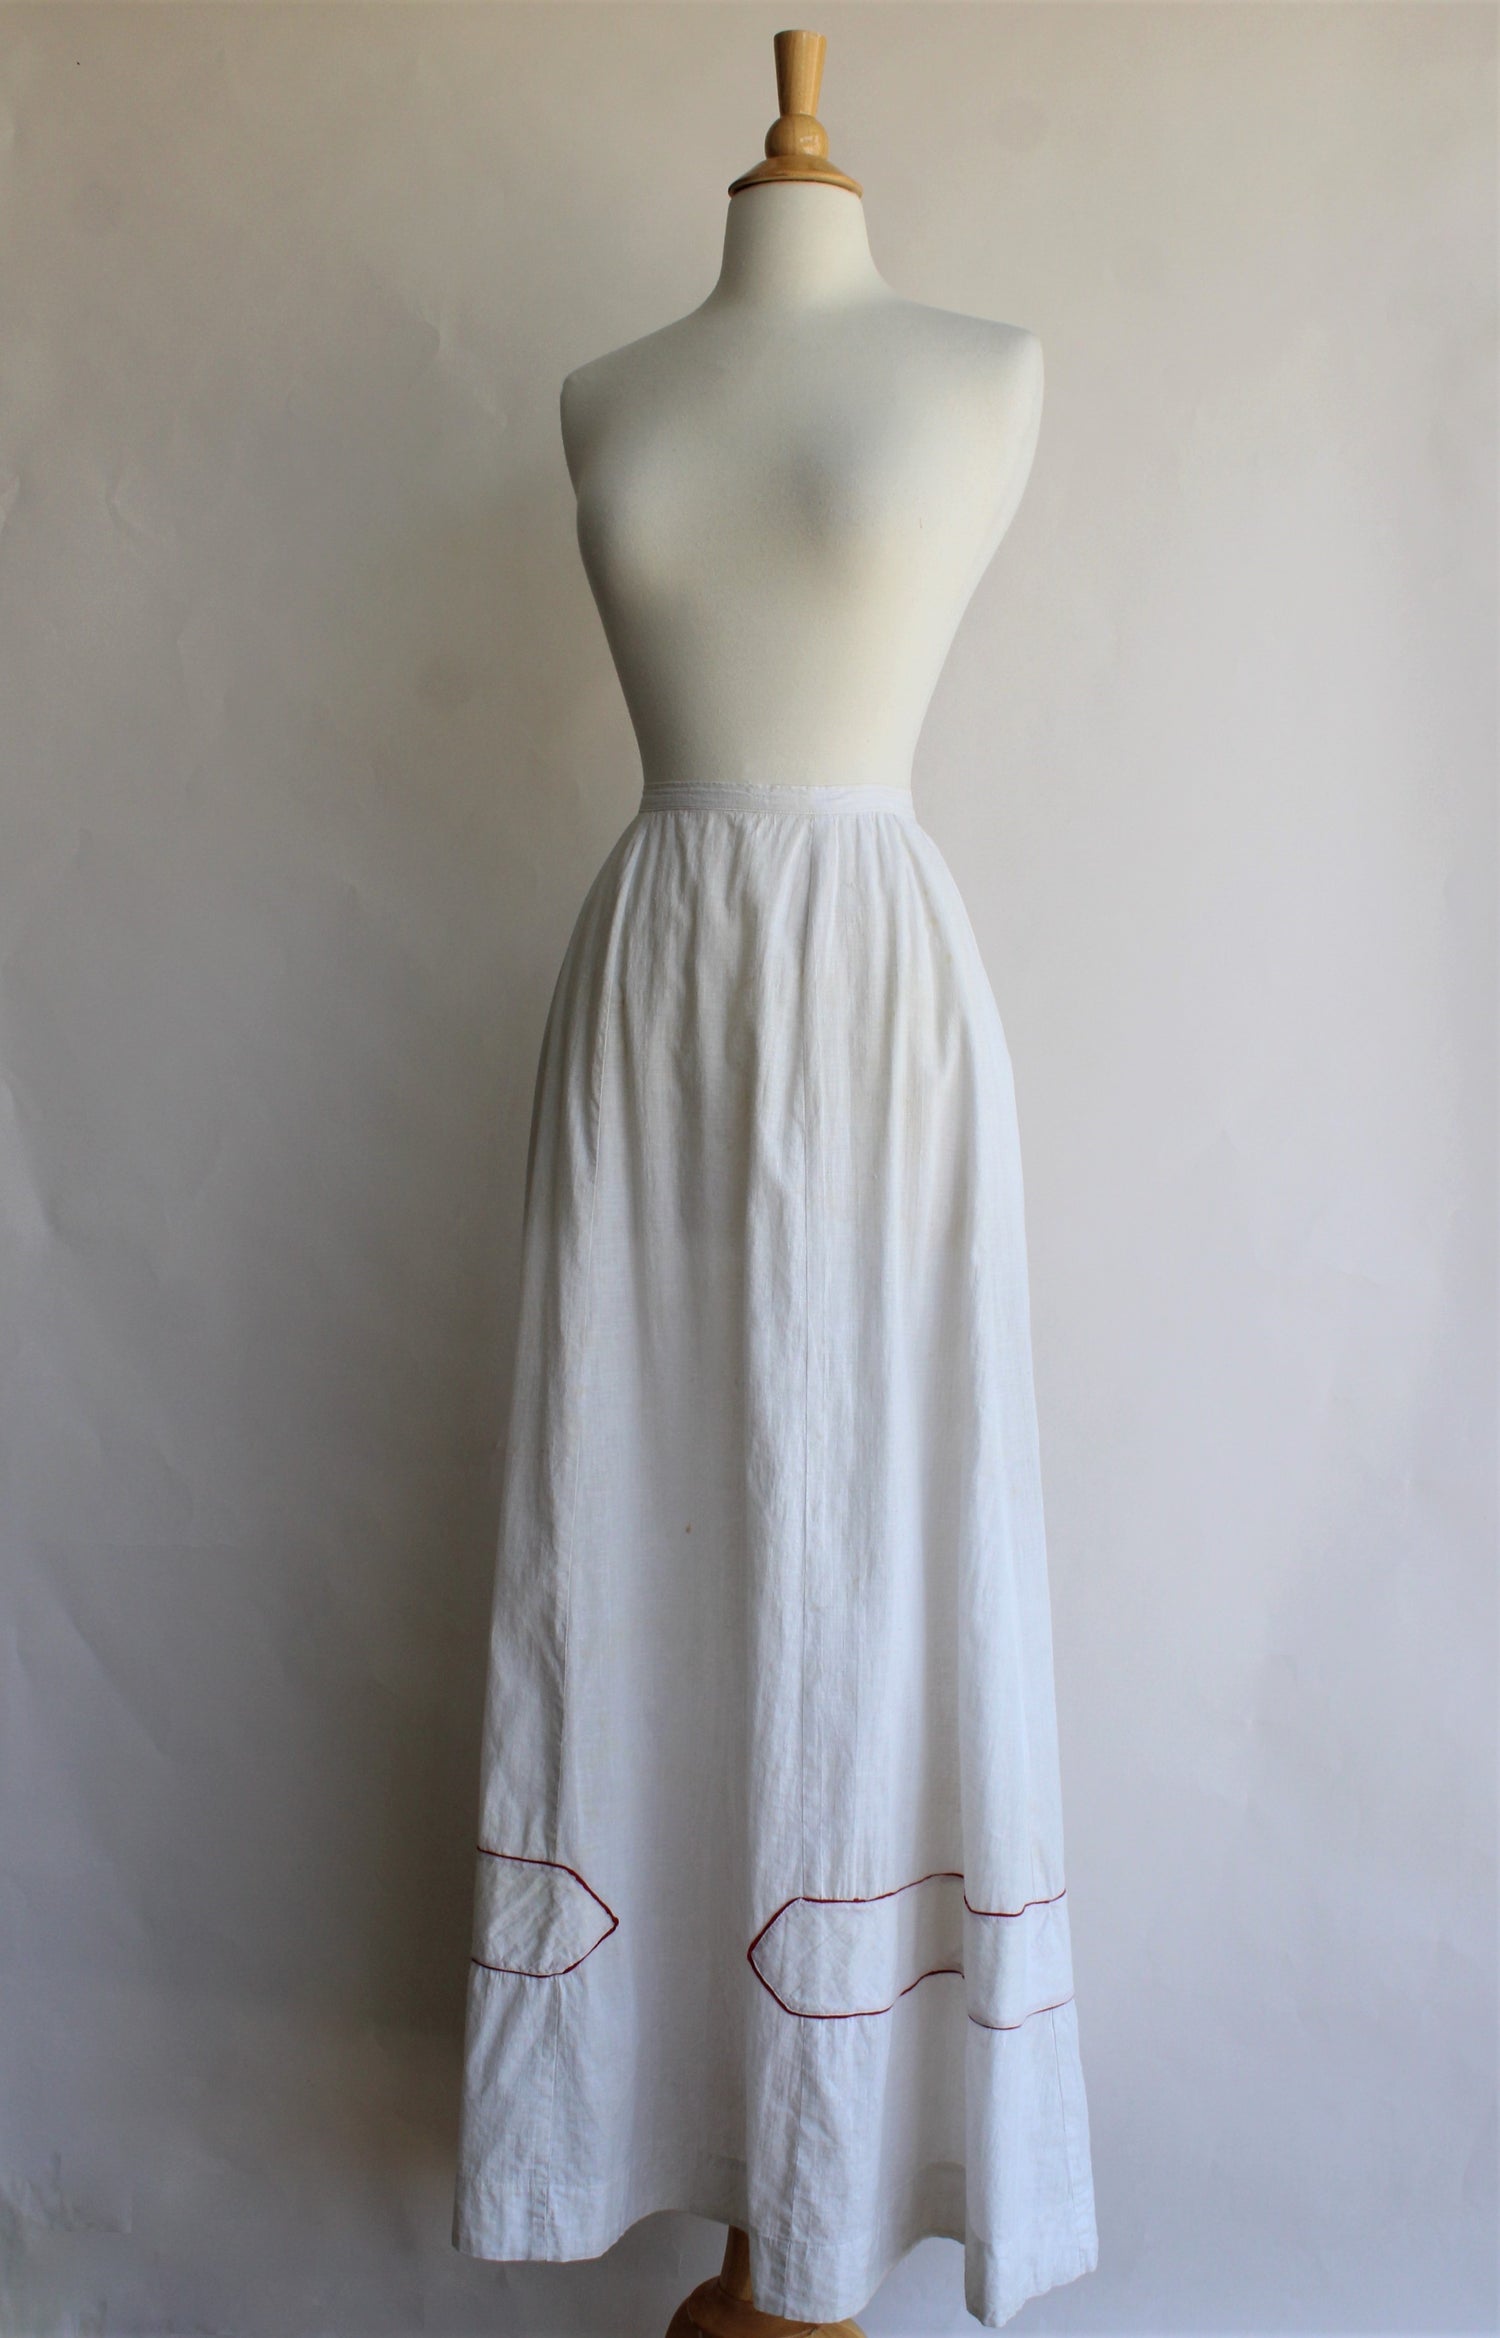 Antique Edwardian White Cotton Petticoat With Red Trim